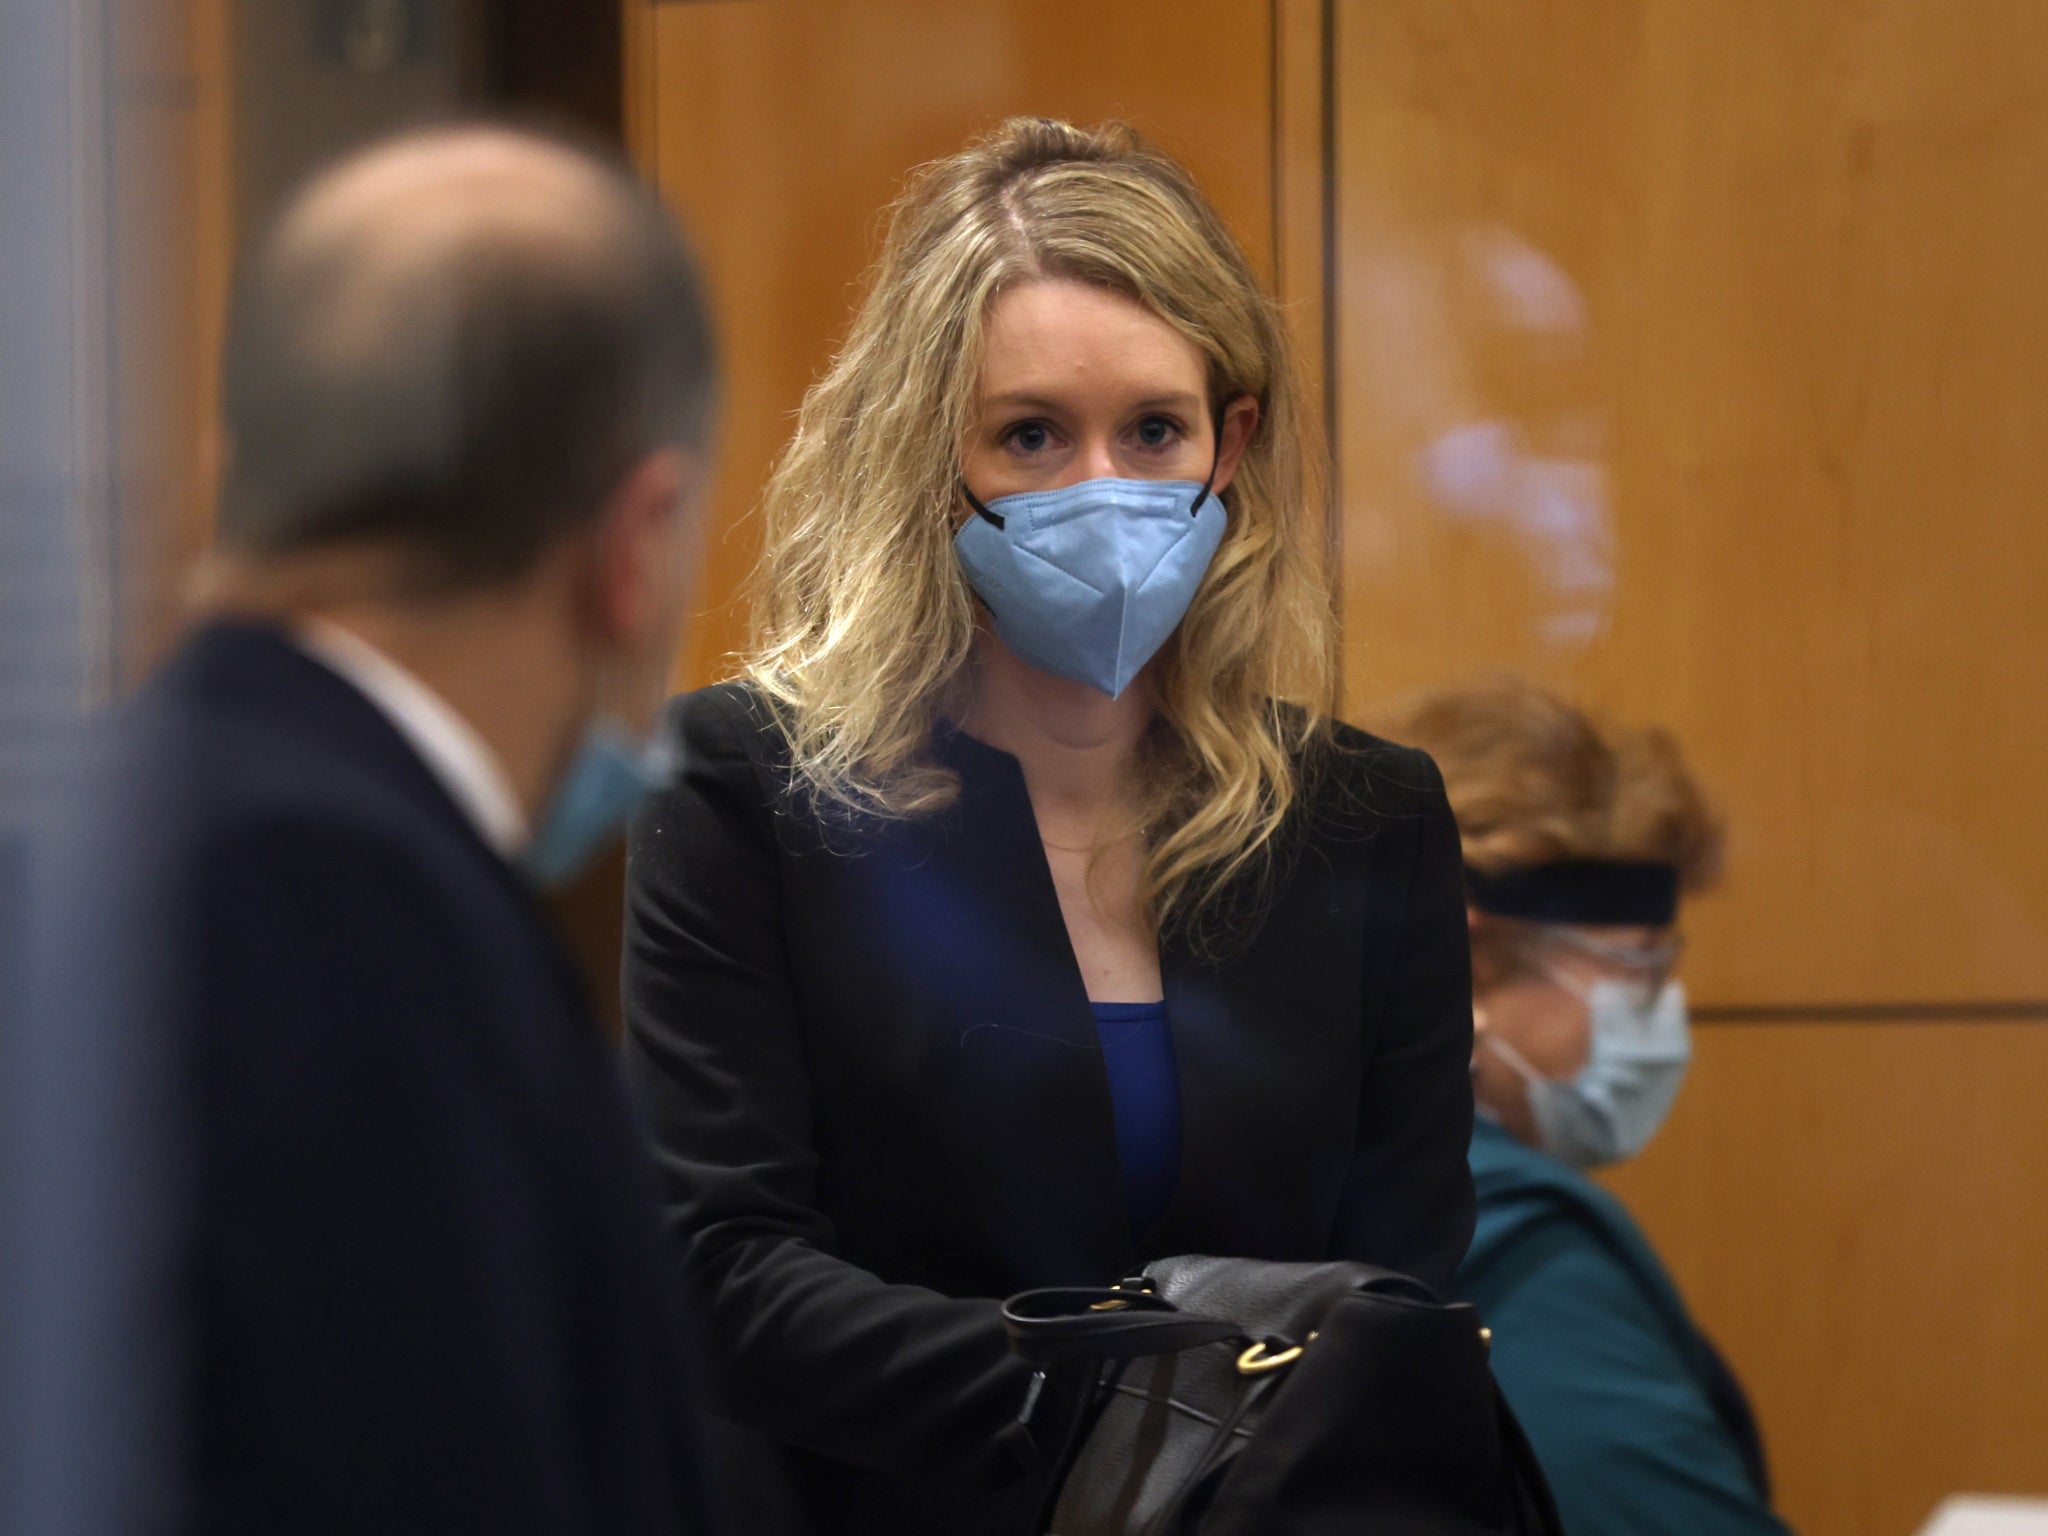 Elizabeth Holmes wears a black blazer and blue top during her trial in December - but no sign of a turtleneck